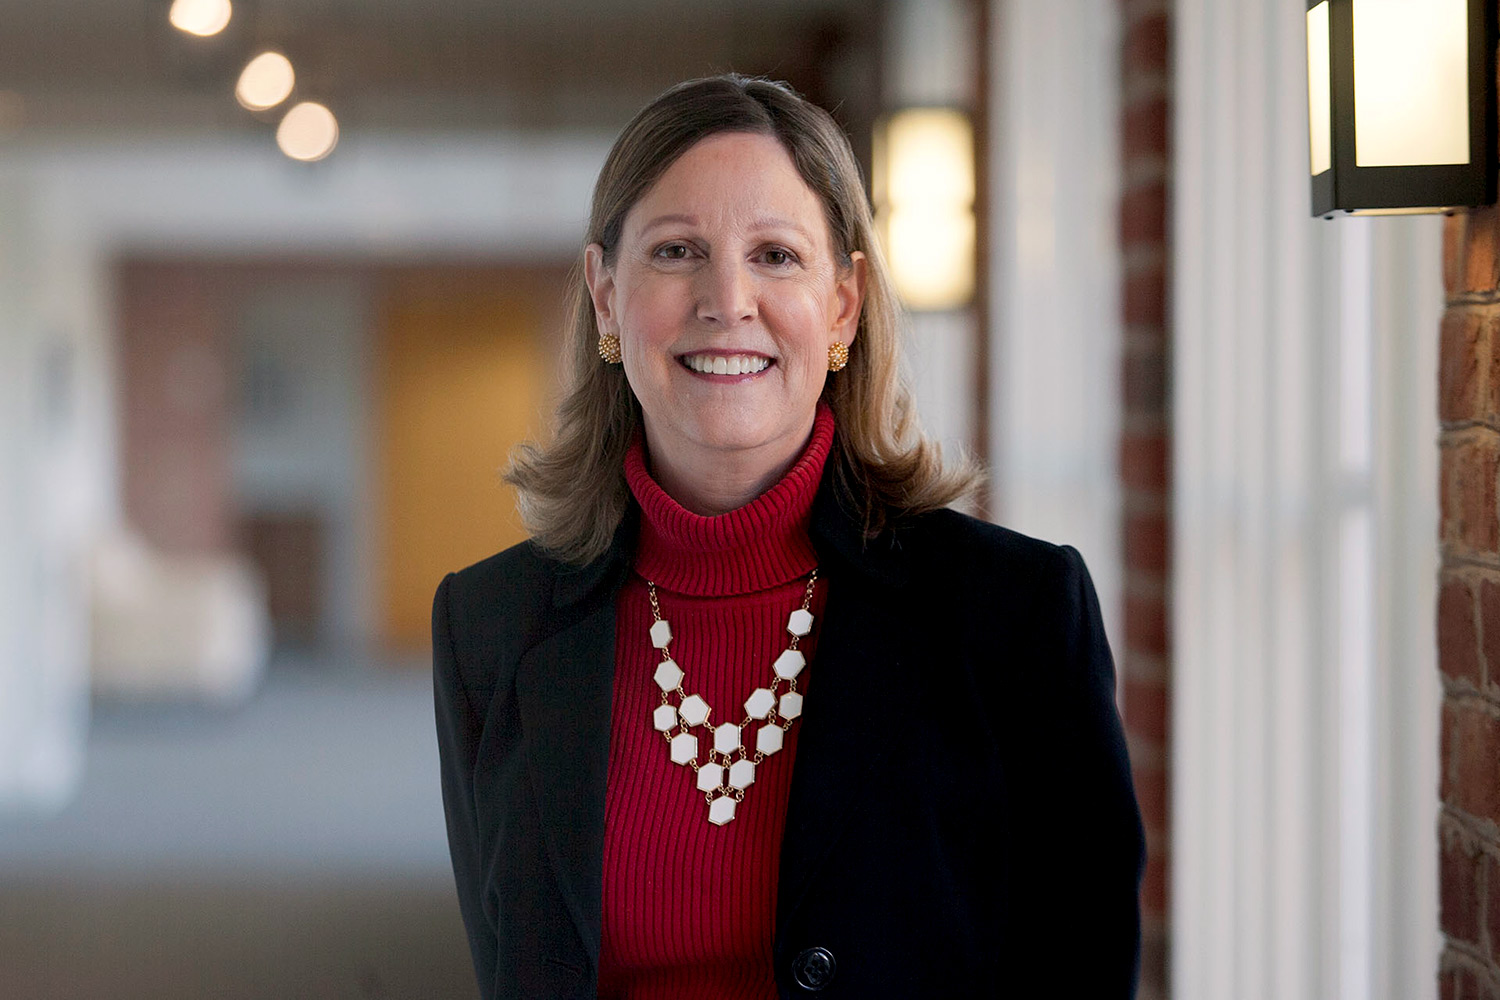 Barbara Perry is the director of presidential studies at the University of Virginia’s Miller Center and co-chair of the Presidential Oral History program.